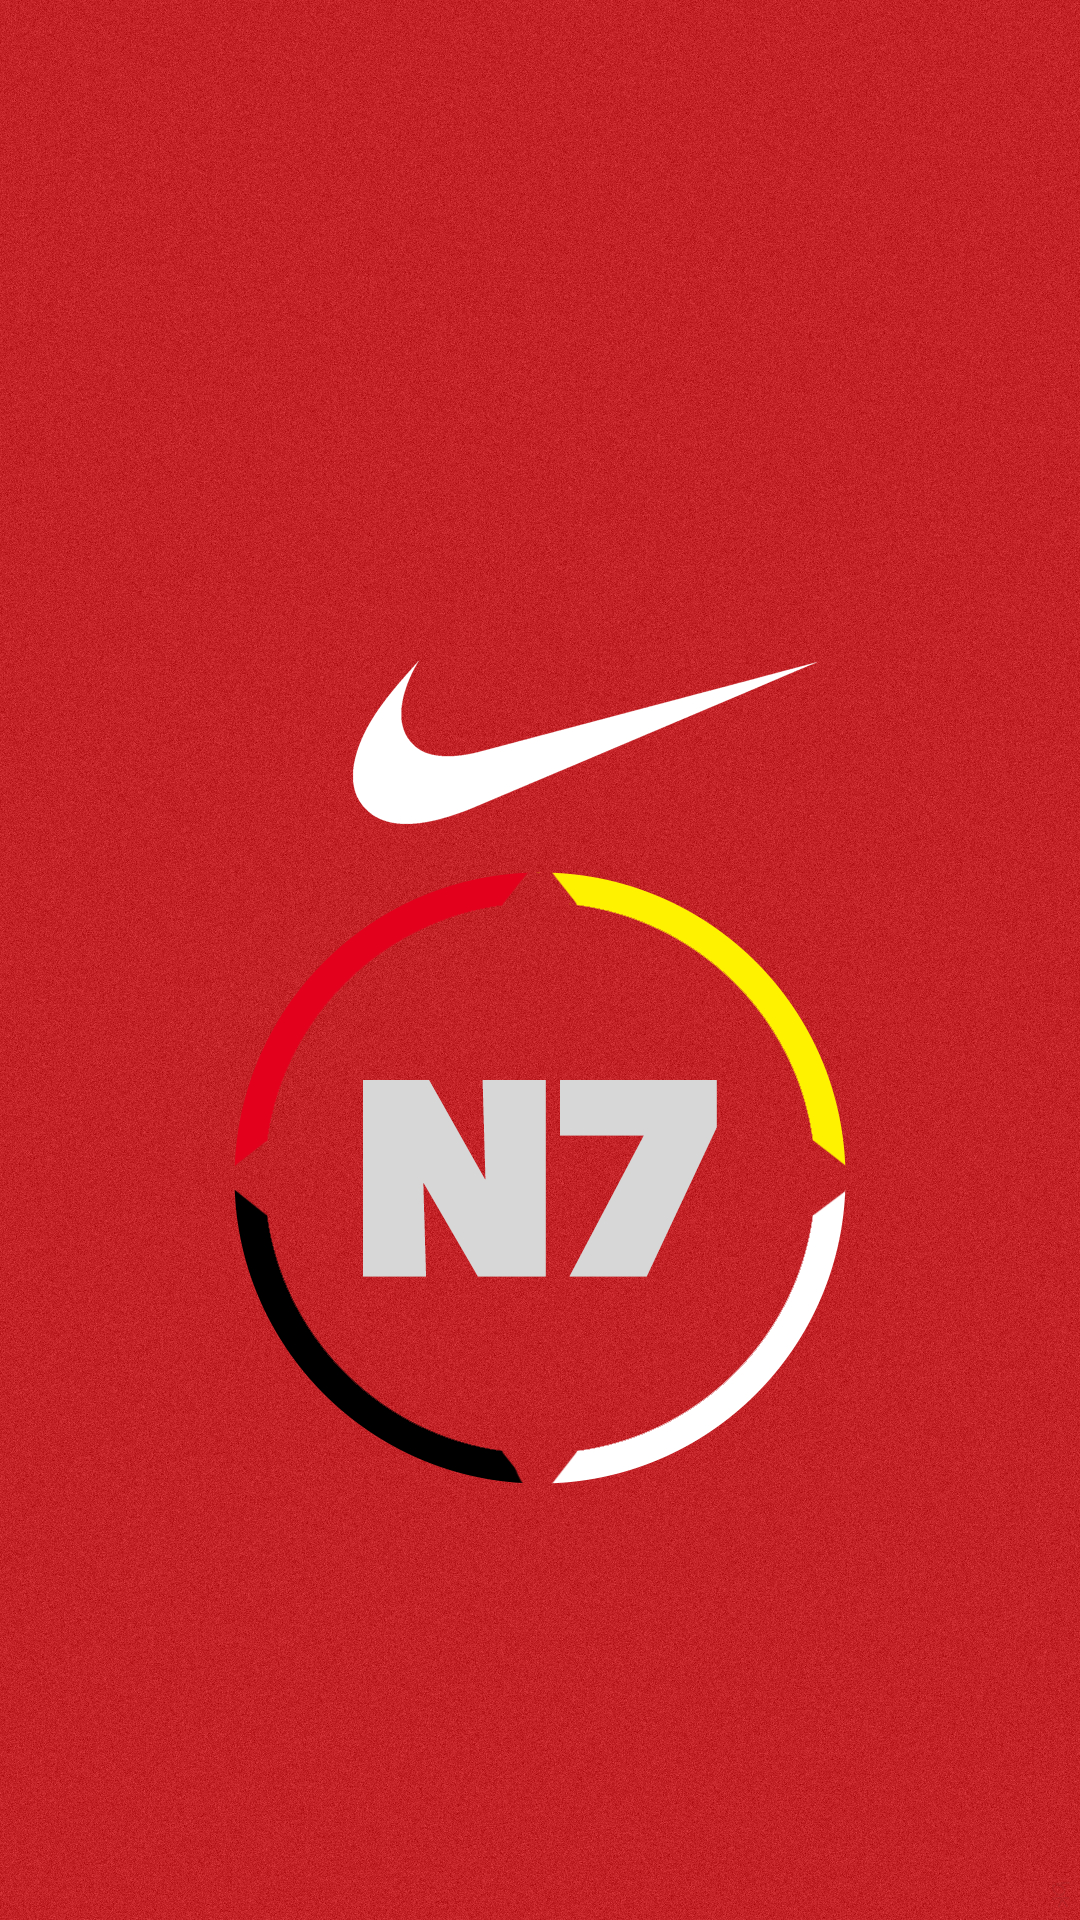 Wallpaper.wiki N7 Red Nike Image For IPhone PIC WPD001563